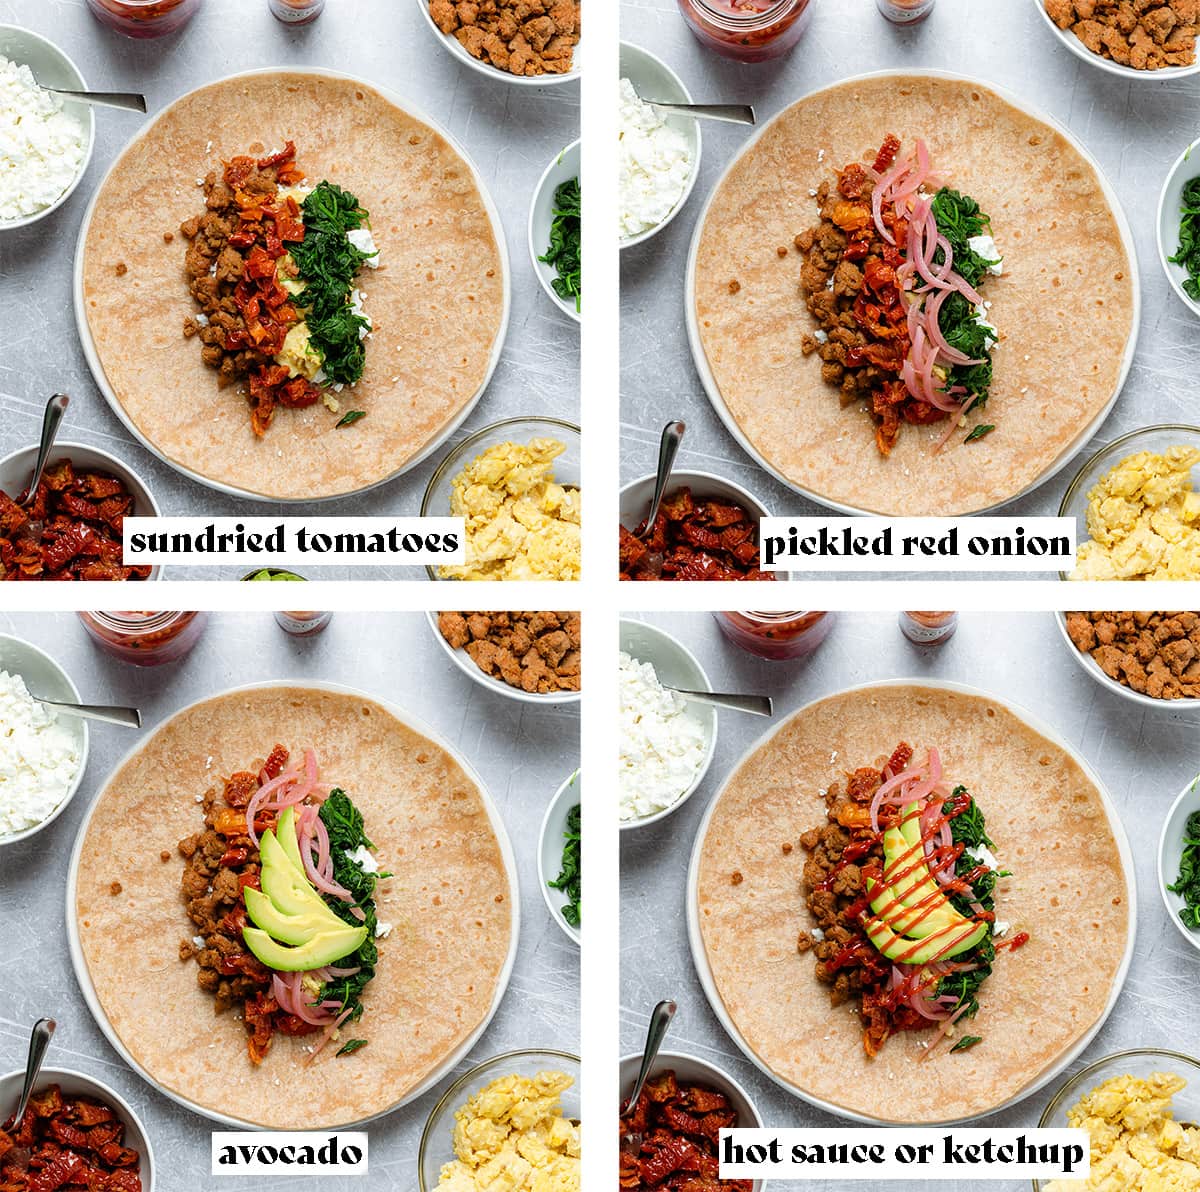 Four shots showing how to make breakfast burritos adding sun-dried tomatoes, onion, avocado, and hot sauce.